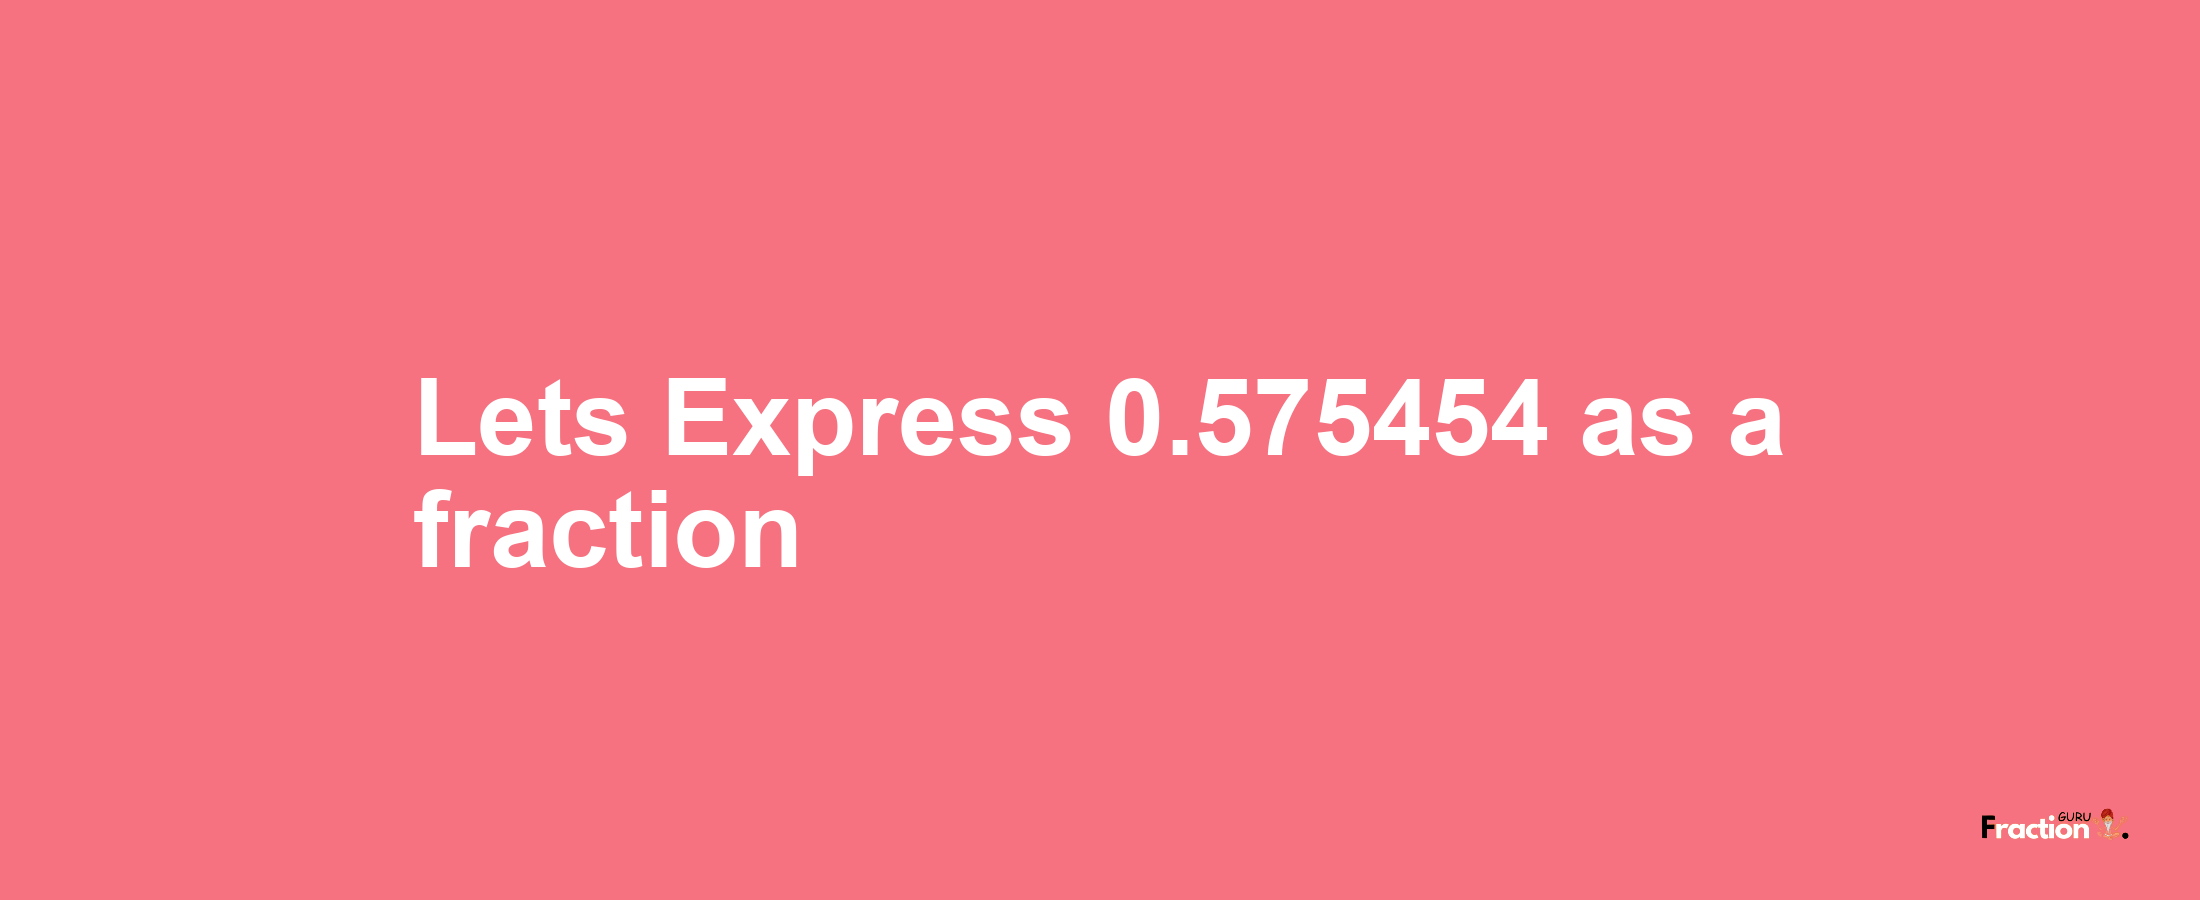 Lets Express 0.575454 as afraction